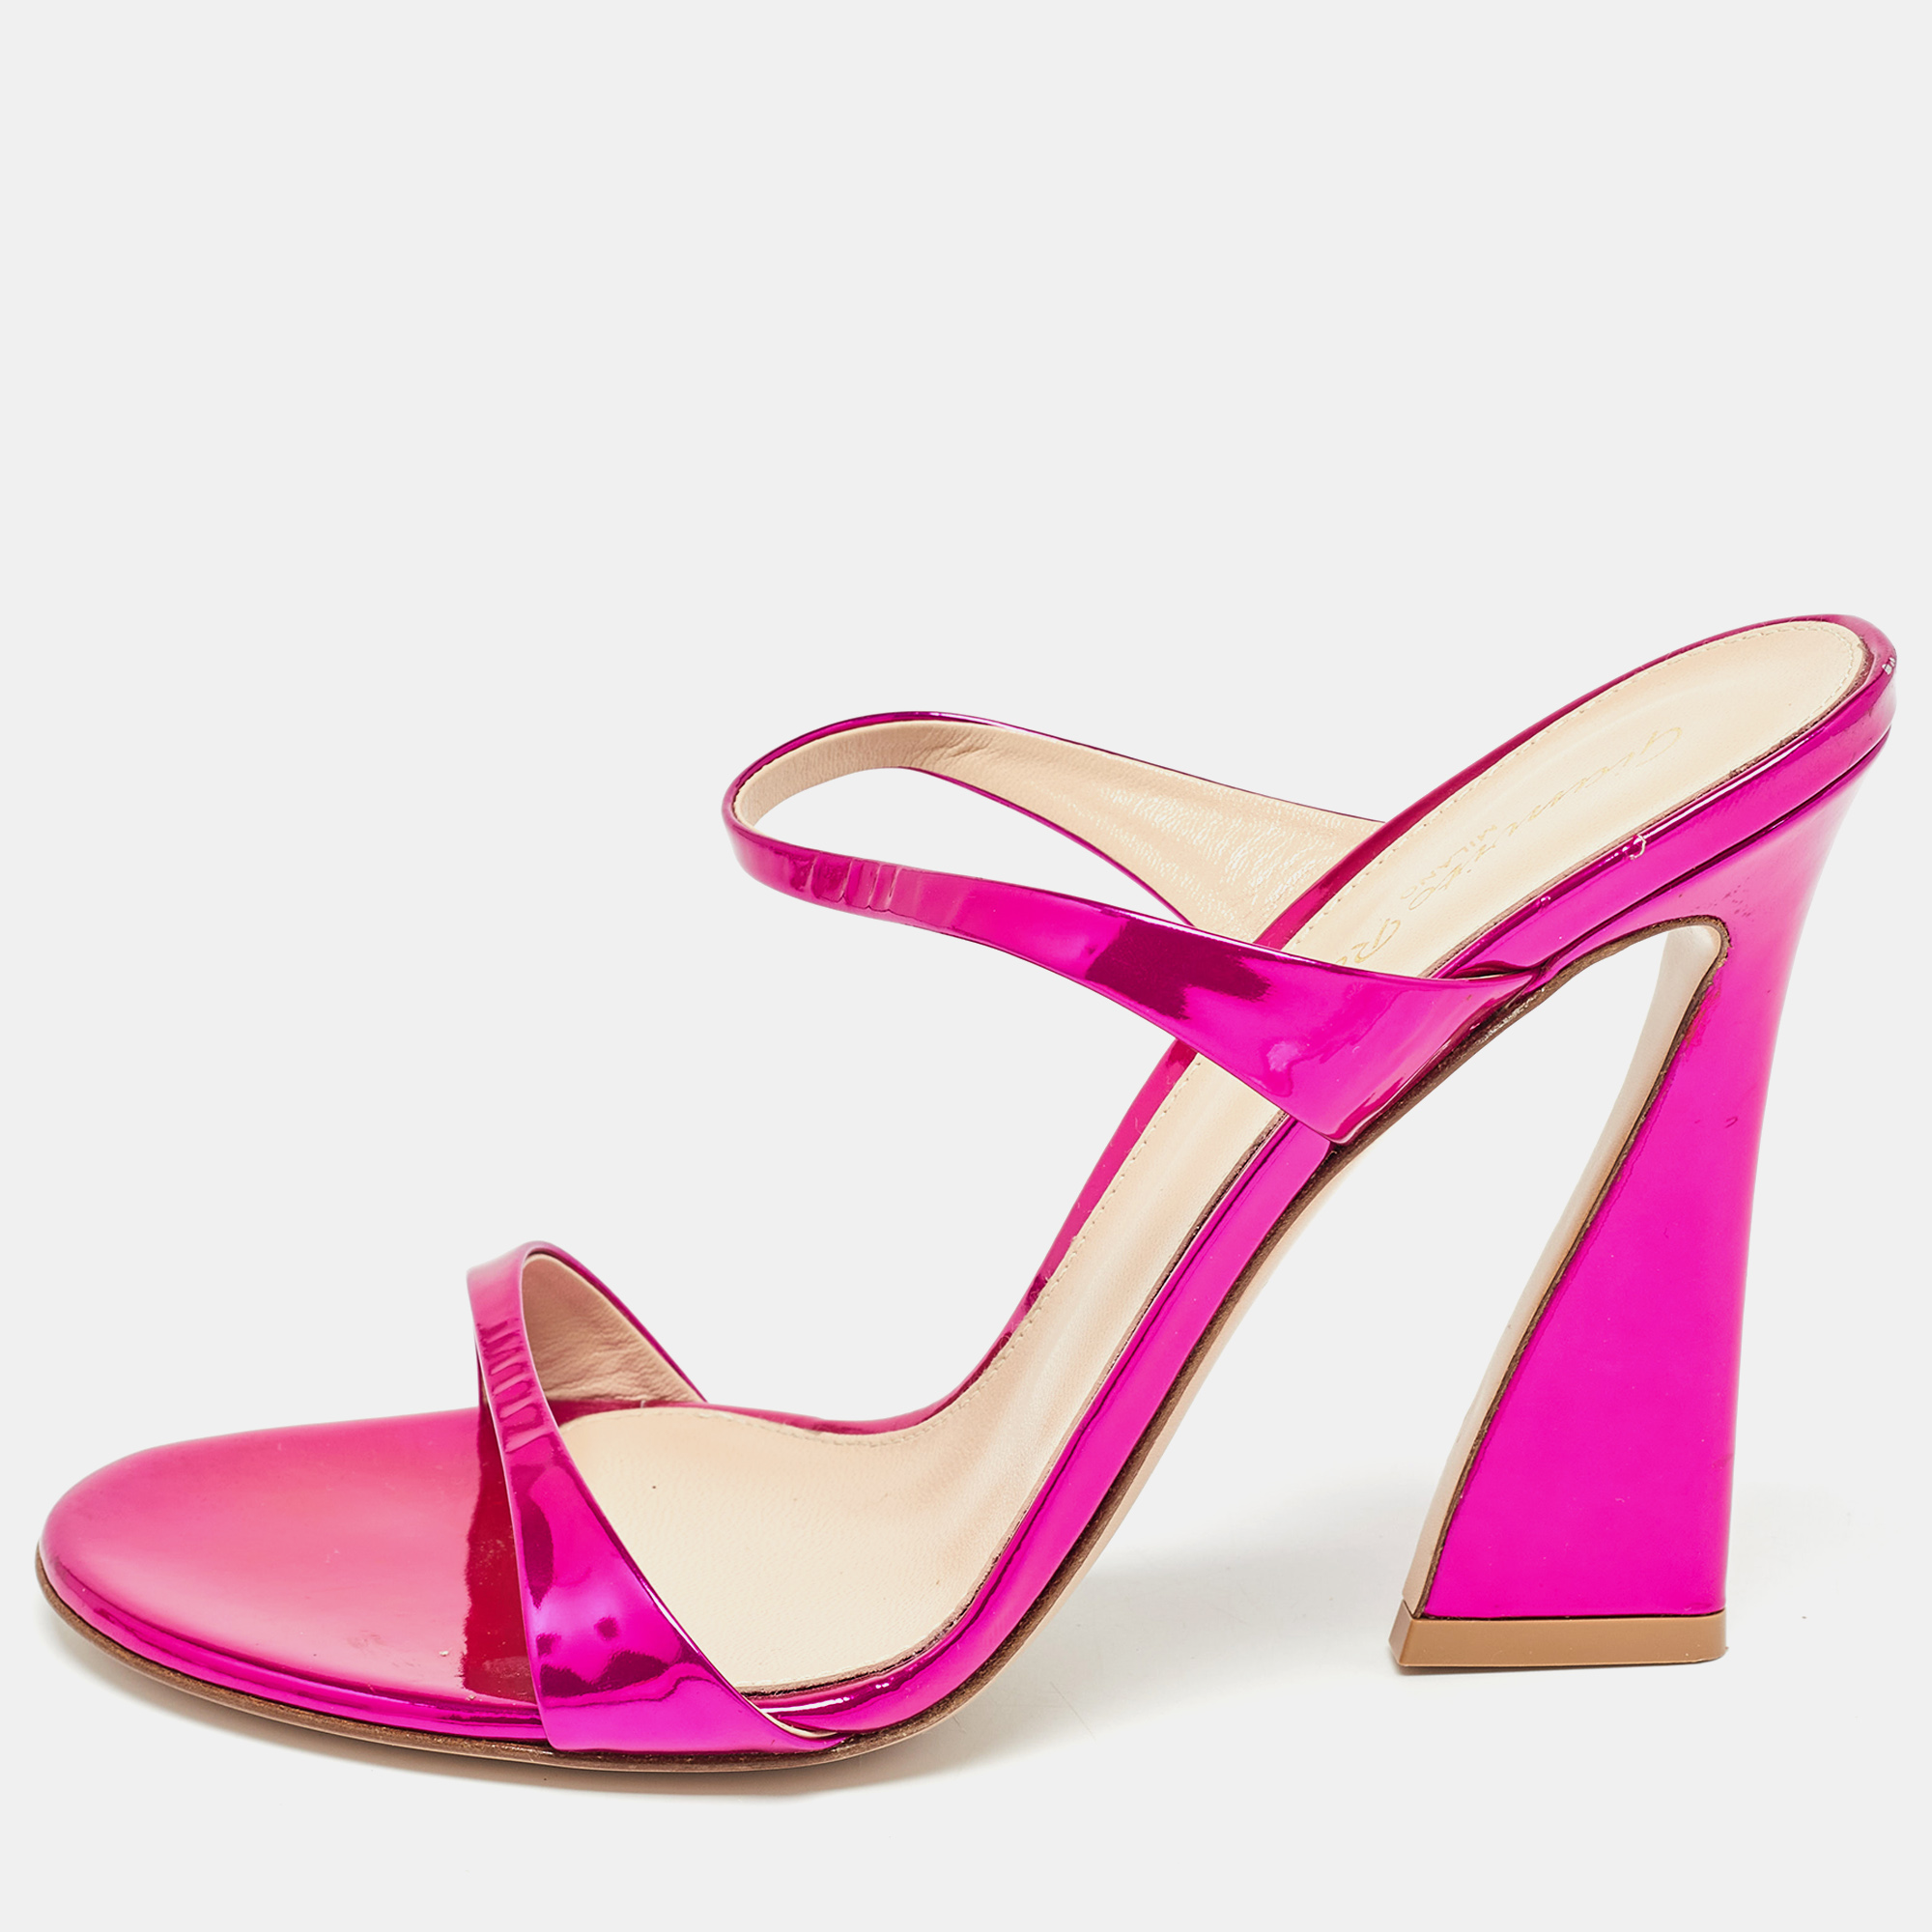 Gianvito rossi metallic pink leather double strap slide sandals size 38.5